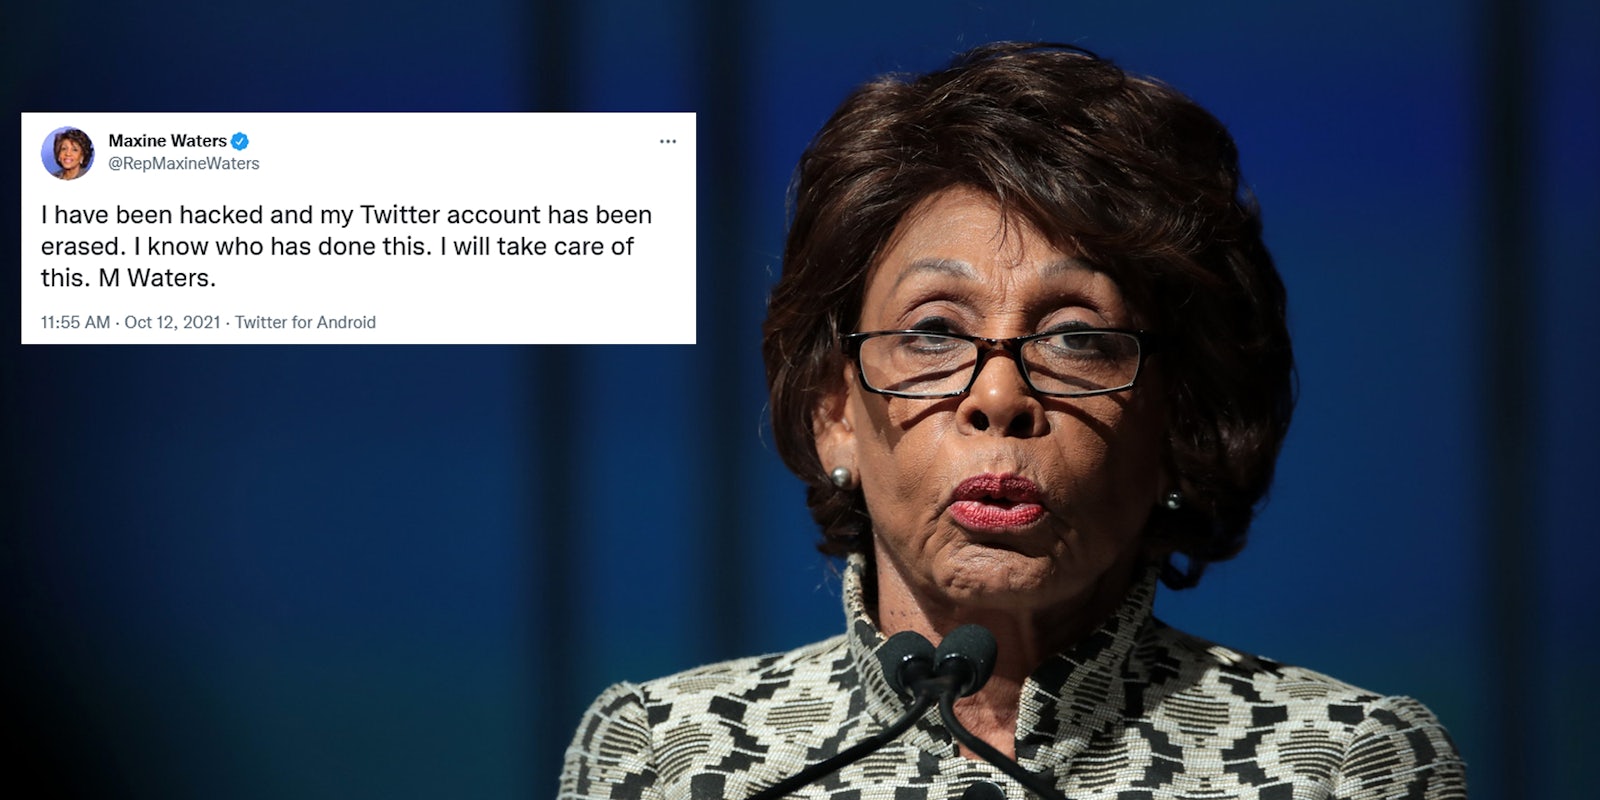 Rep. Maxine Waters next to a tweet where she claims her Twitter was hacked and had been 'erased.'